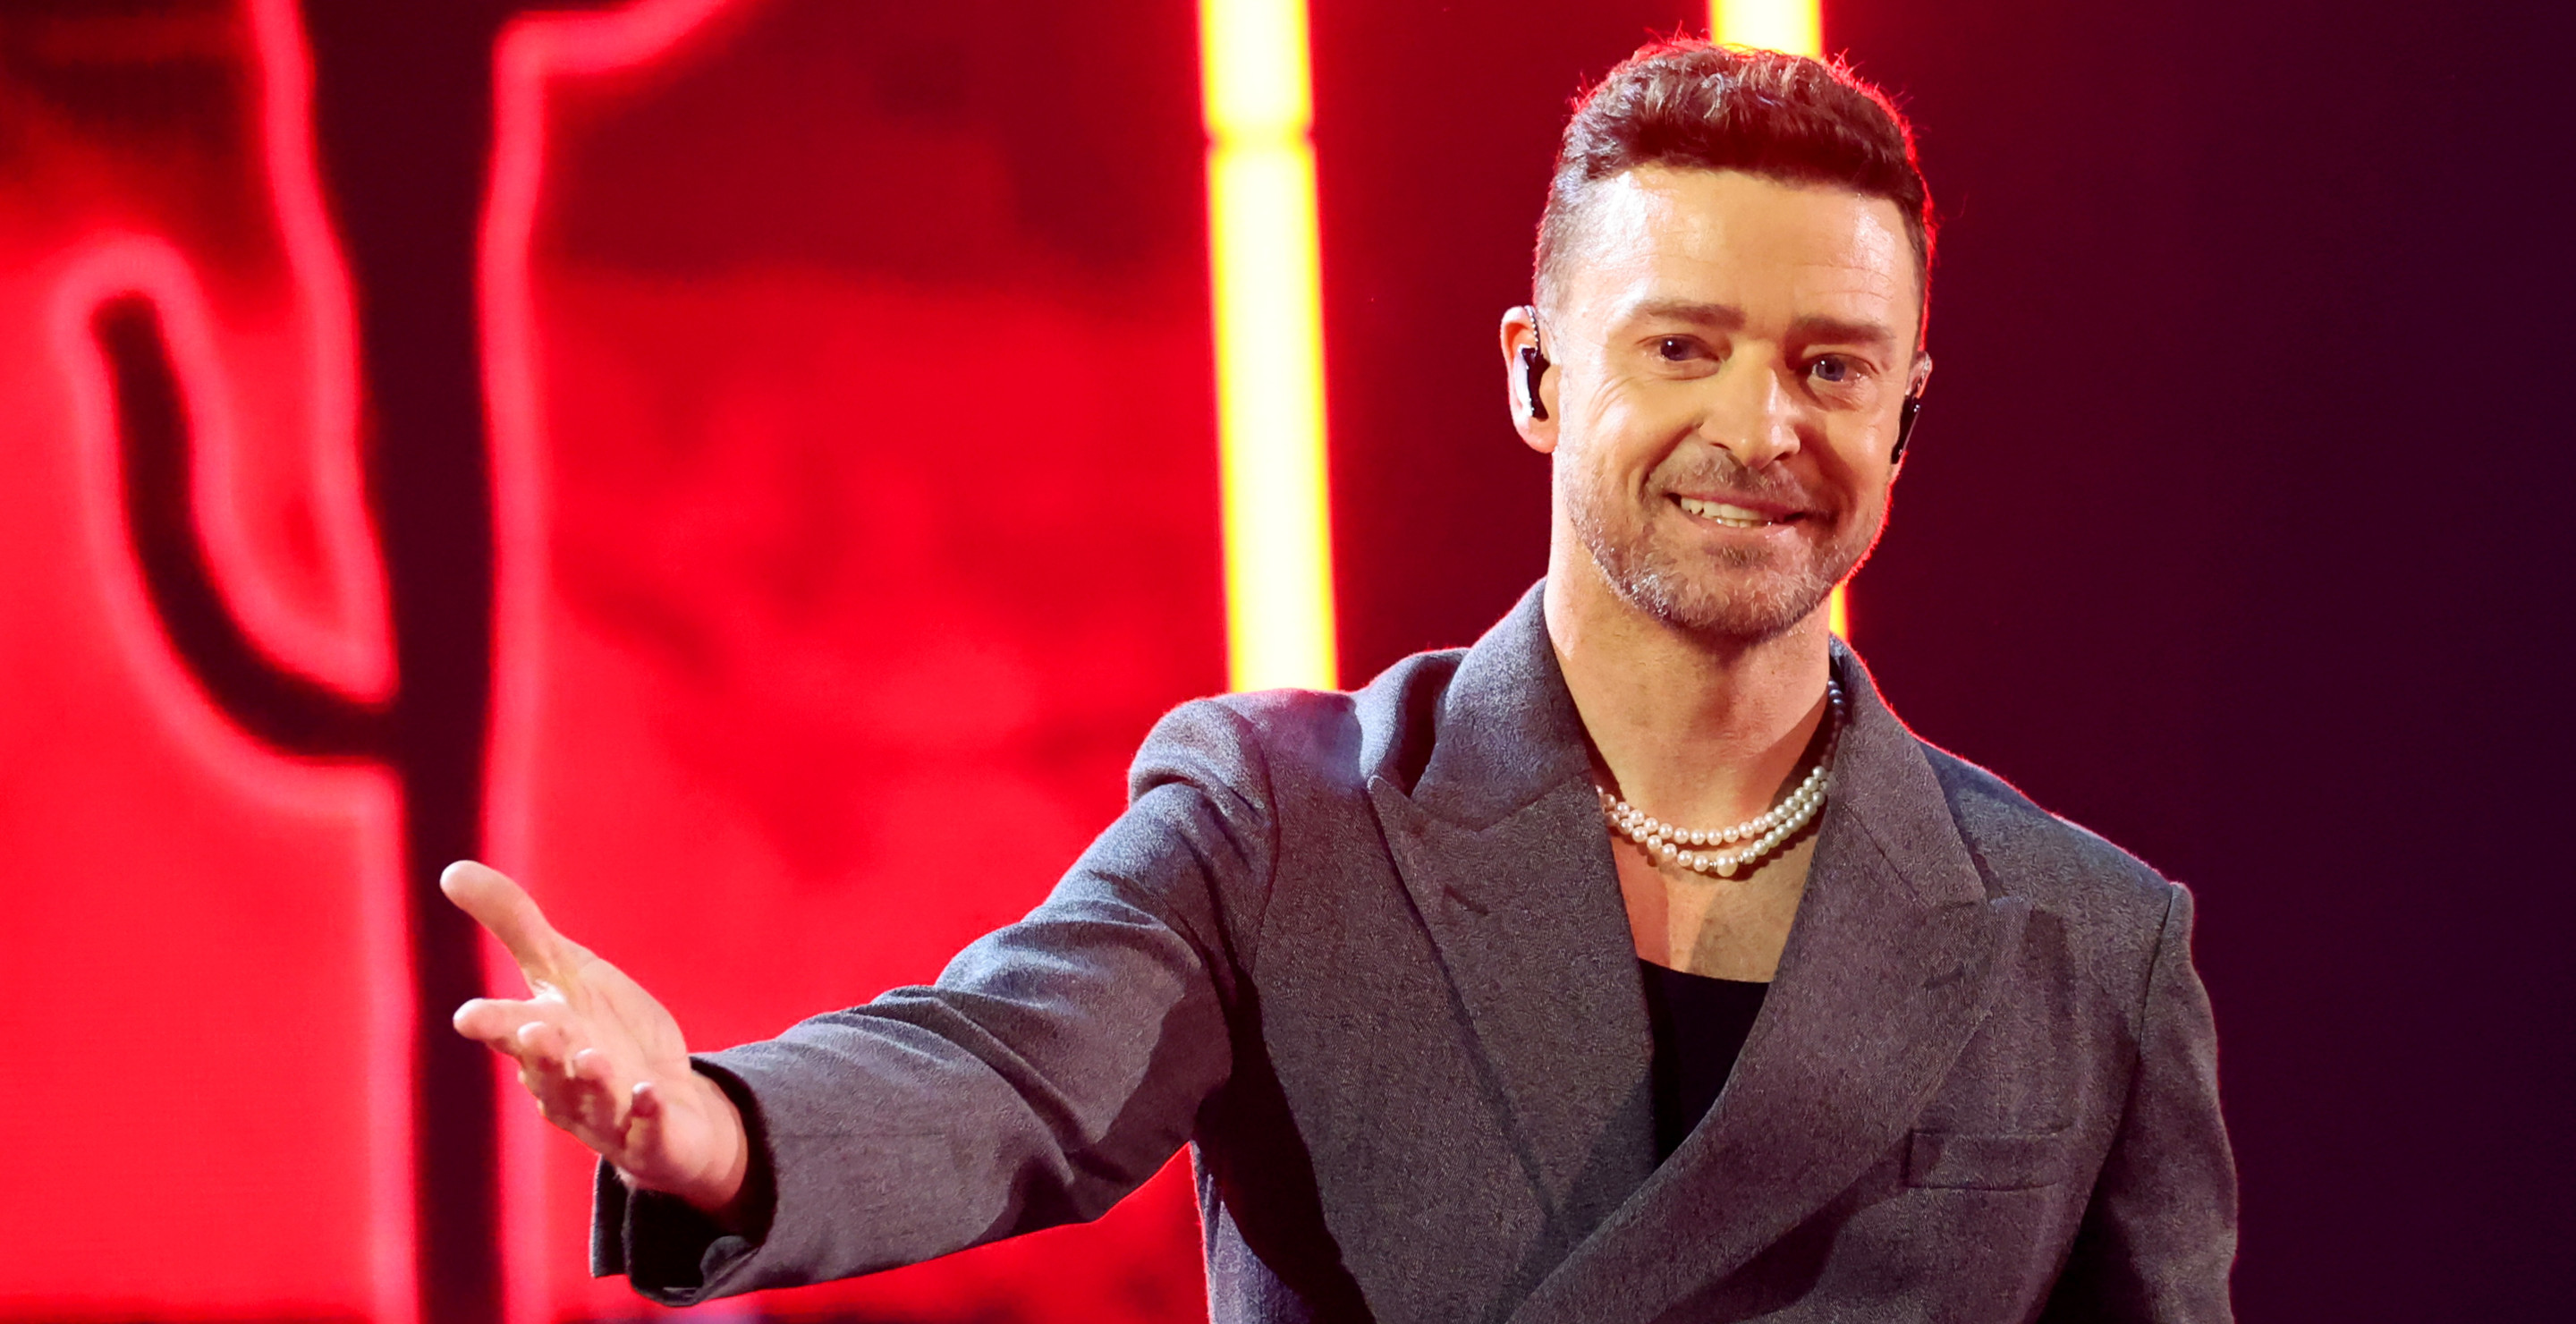 Justin Timberlake Arrested For Driving While Intoxicated In New York